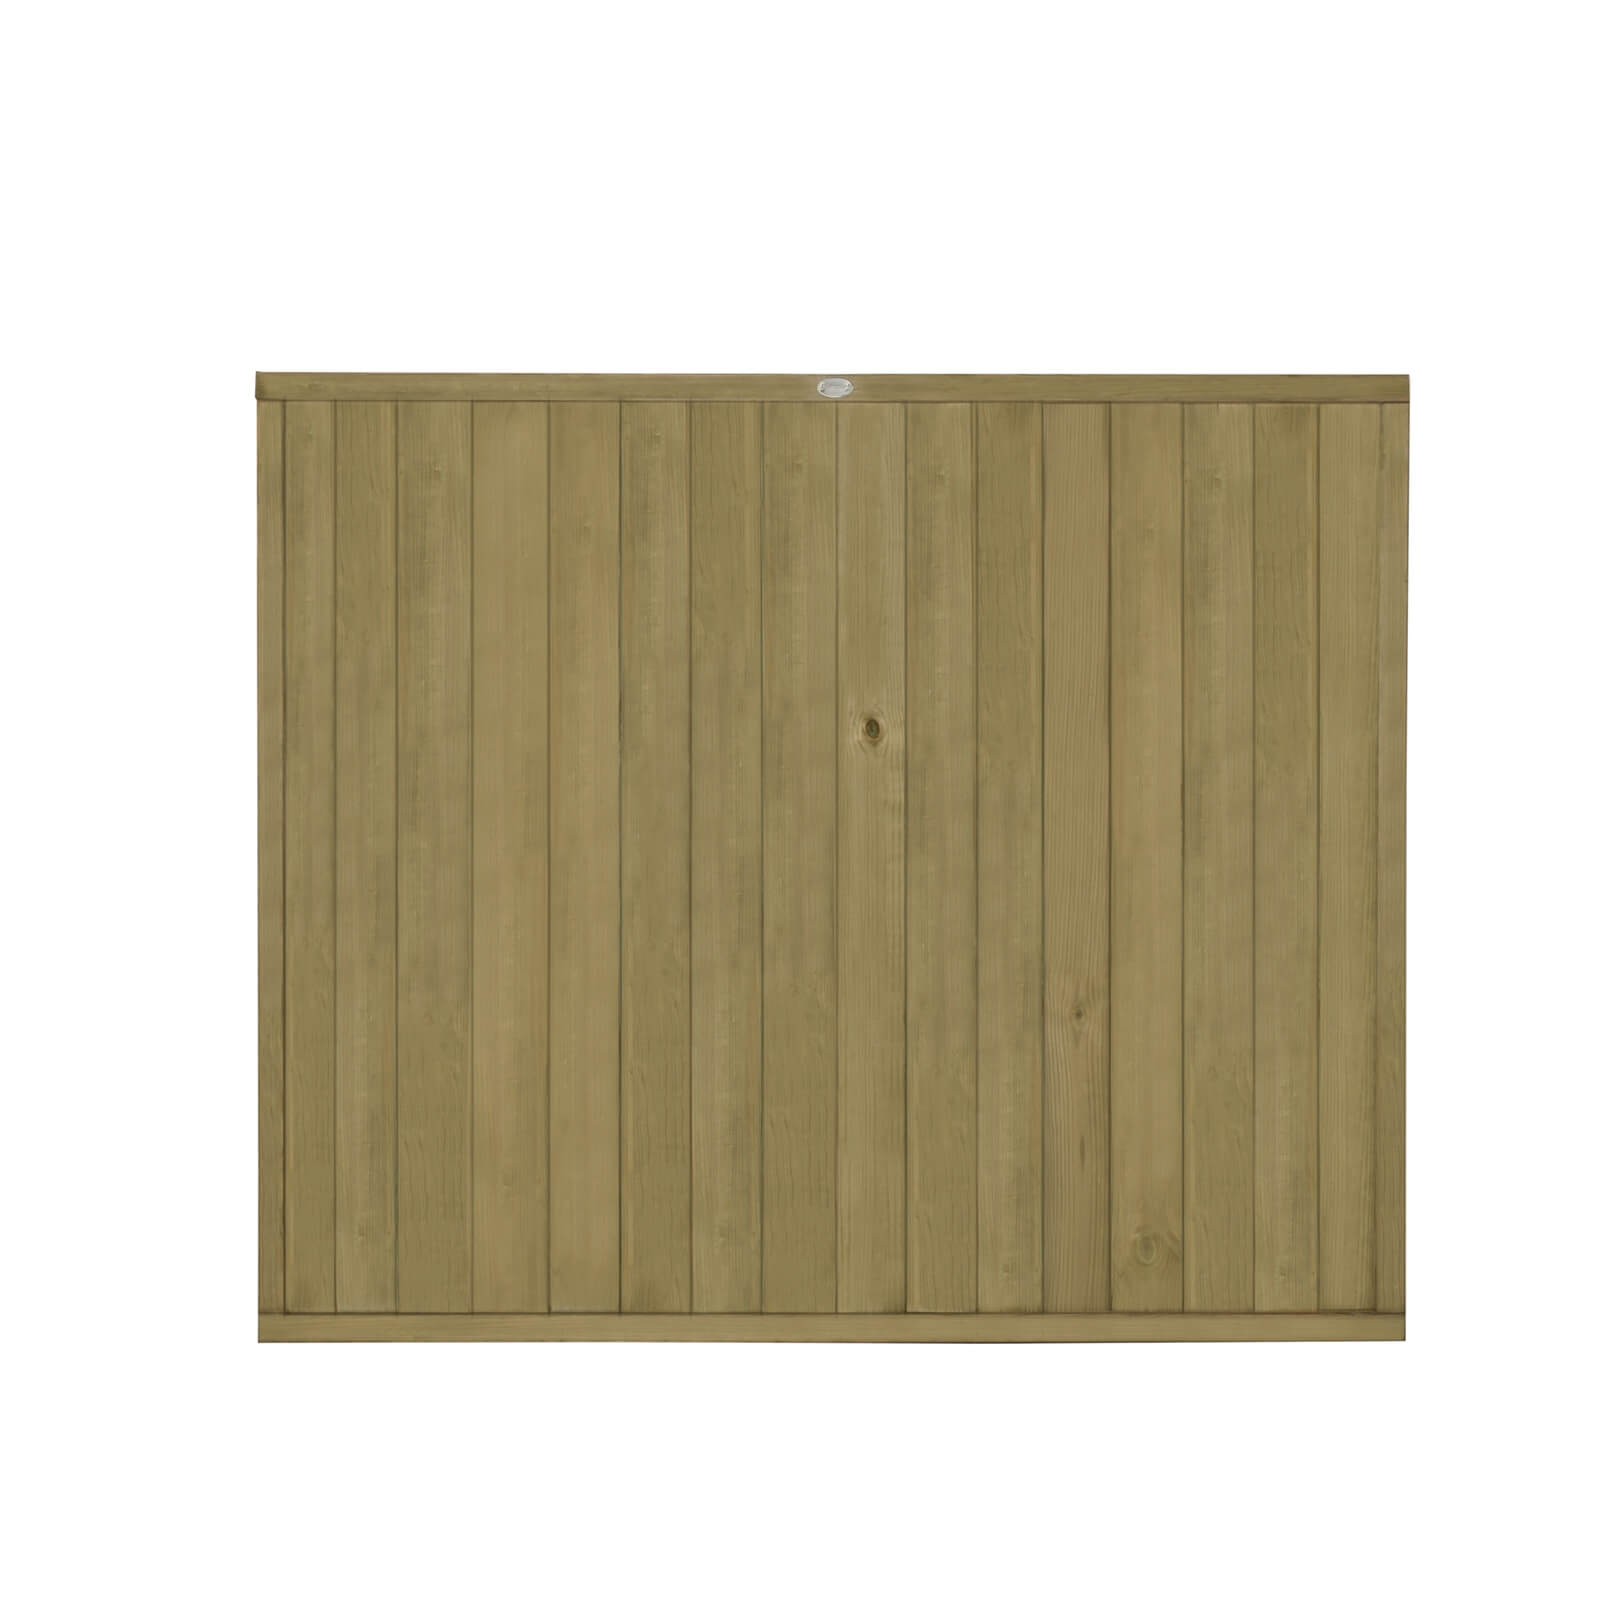 Forest Vertical Tongue & Groove Fence Panel - 5ft - Pack of 4